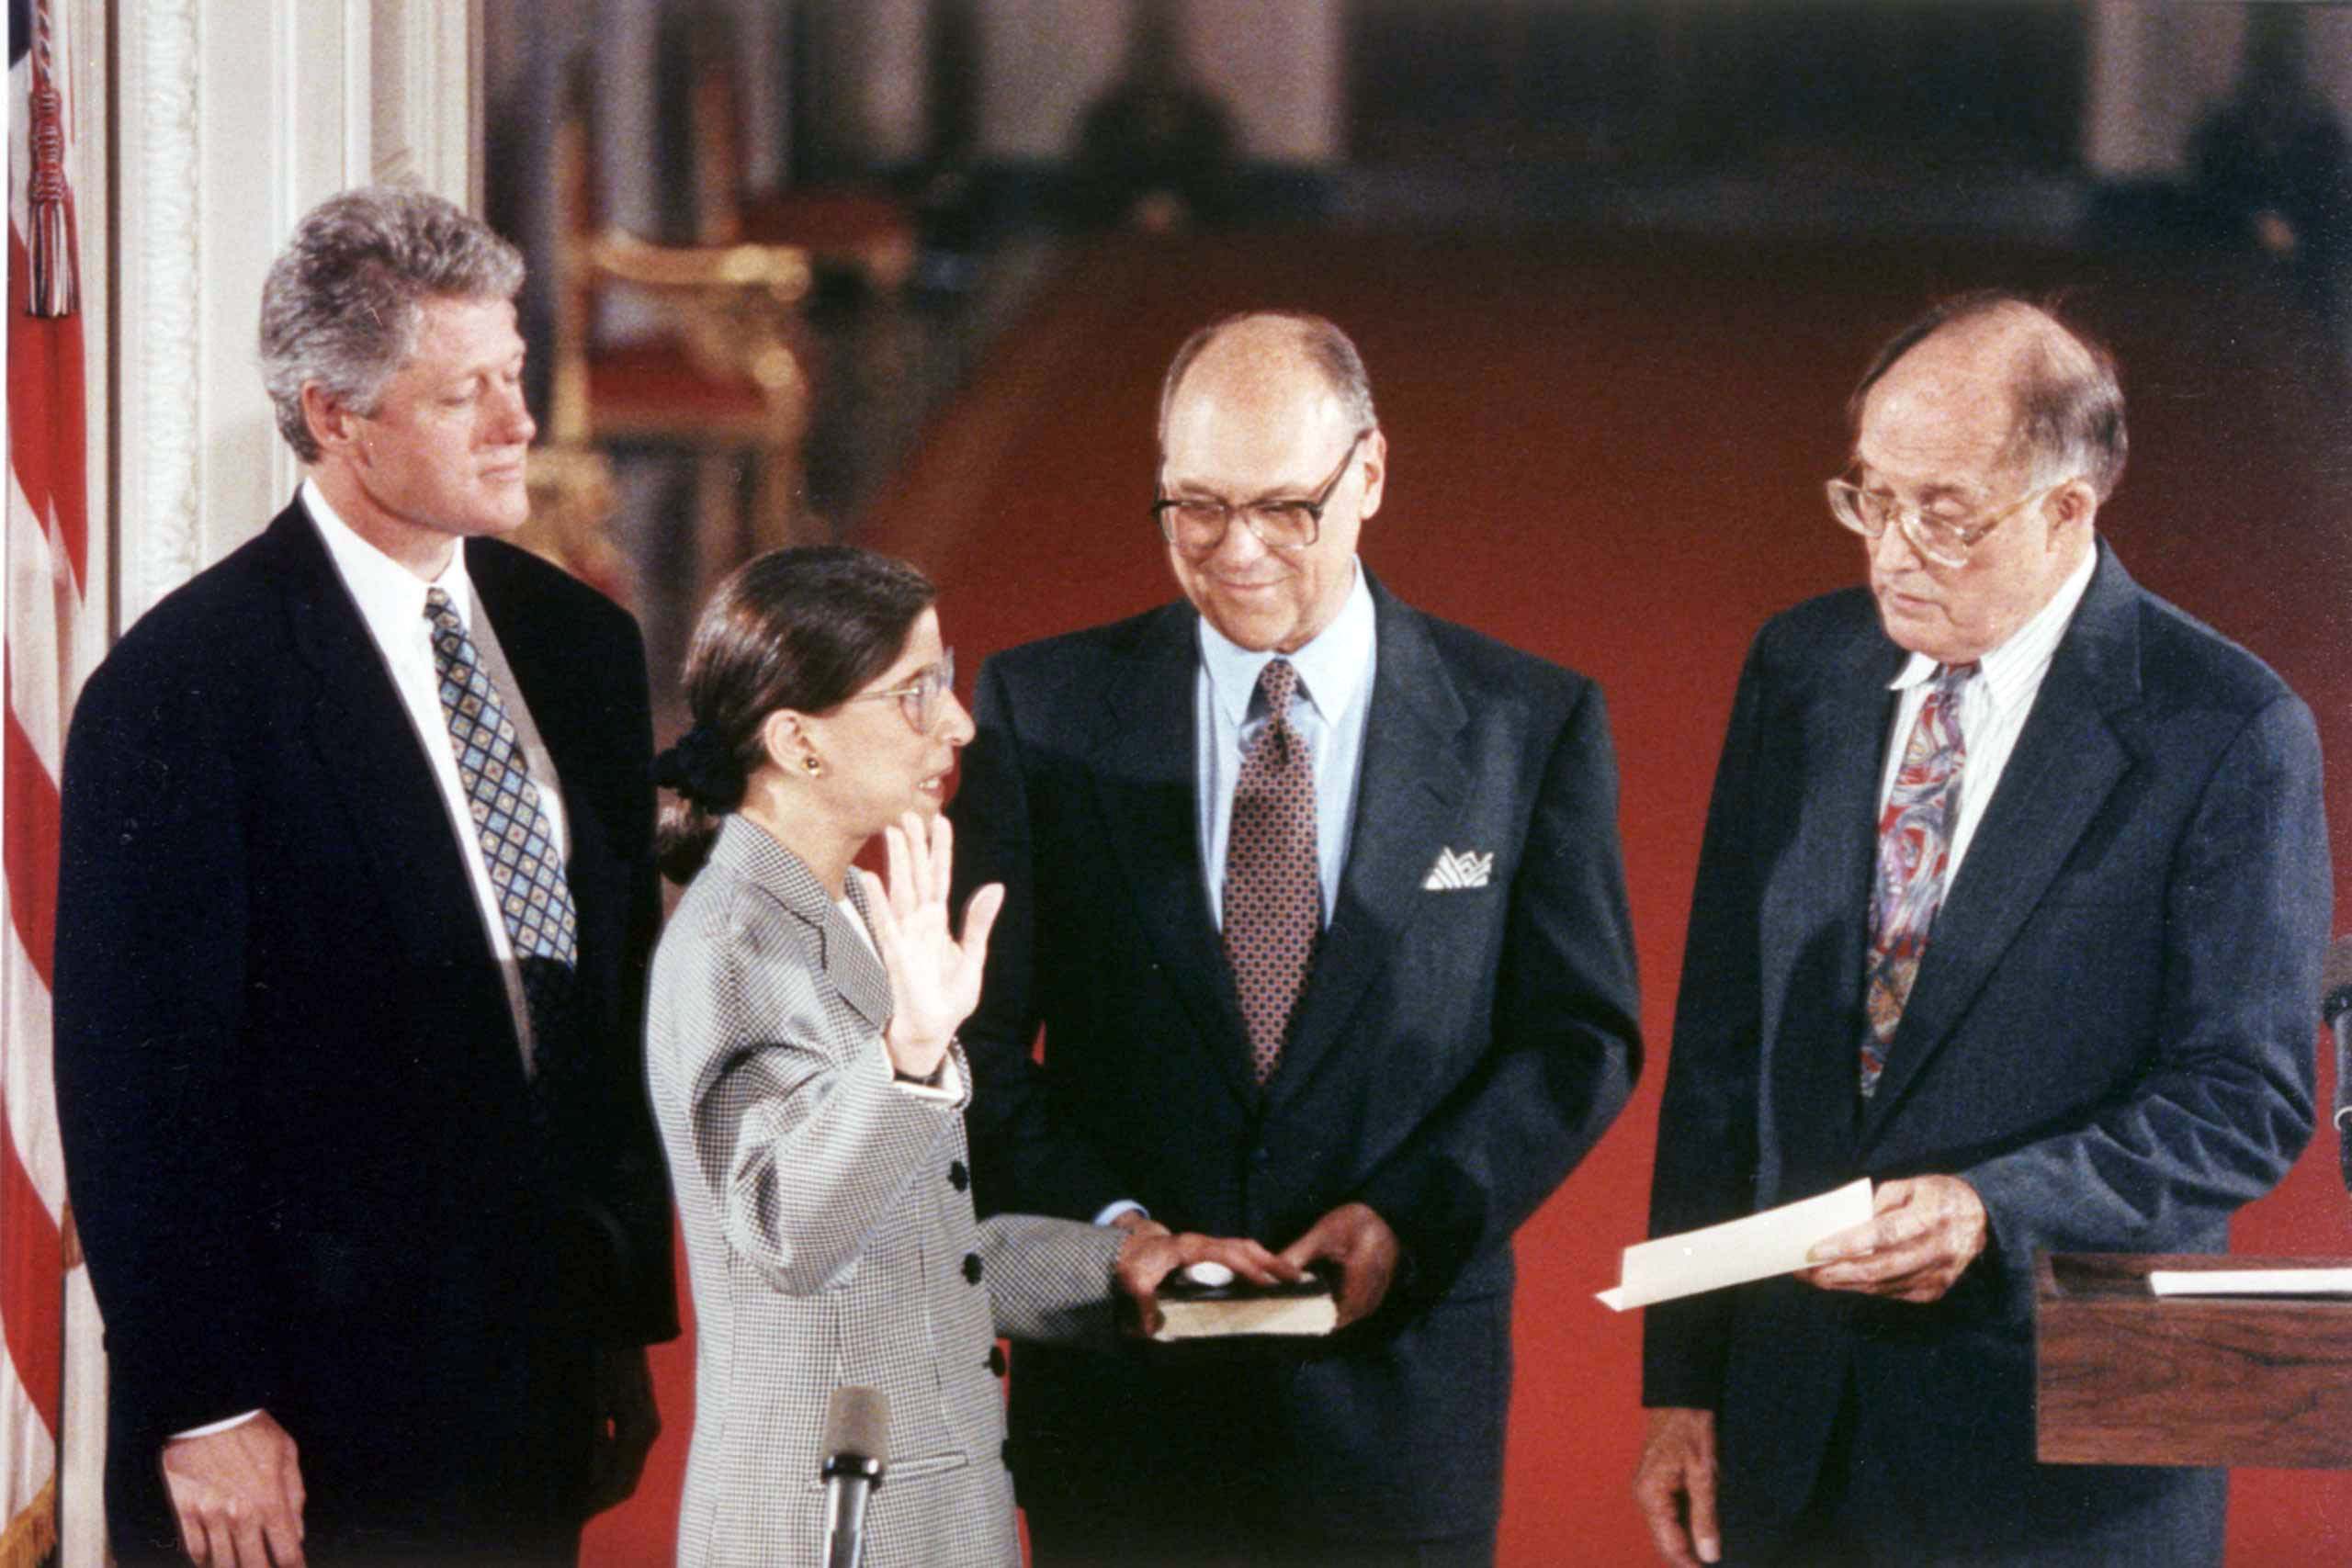 August 10, 1993 Justice Ruth Bader Ginsburg is sworn in as an Associate Justice of the Supreme Court. From left to right stand President Bill Clinton, Justice Ruth Bader Ginsburg, Martin Ginsburg, and Chief Justice William Rehnquist. (Collection of the Supreme Court of the United States)